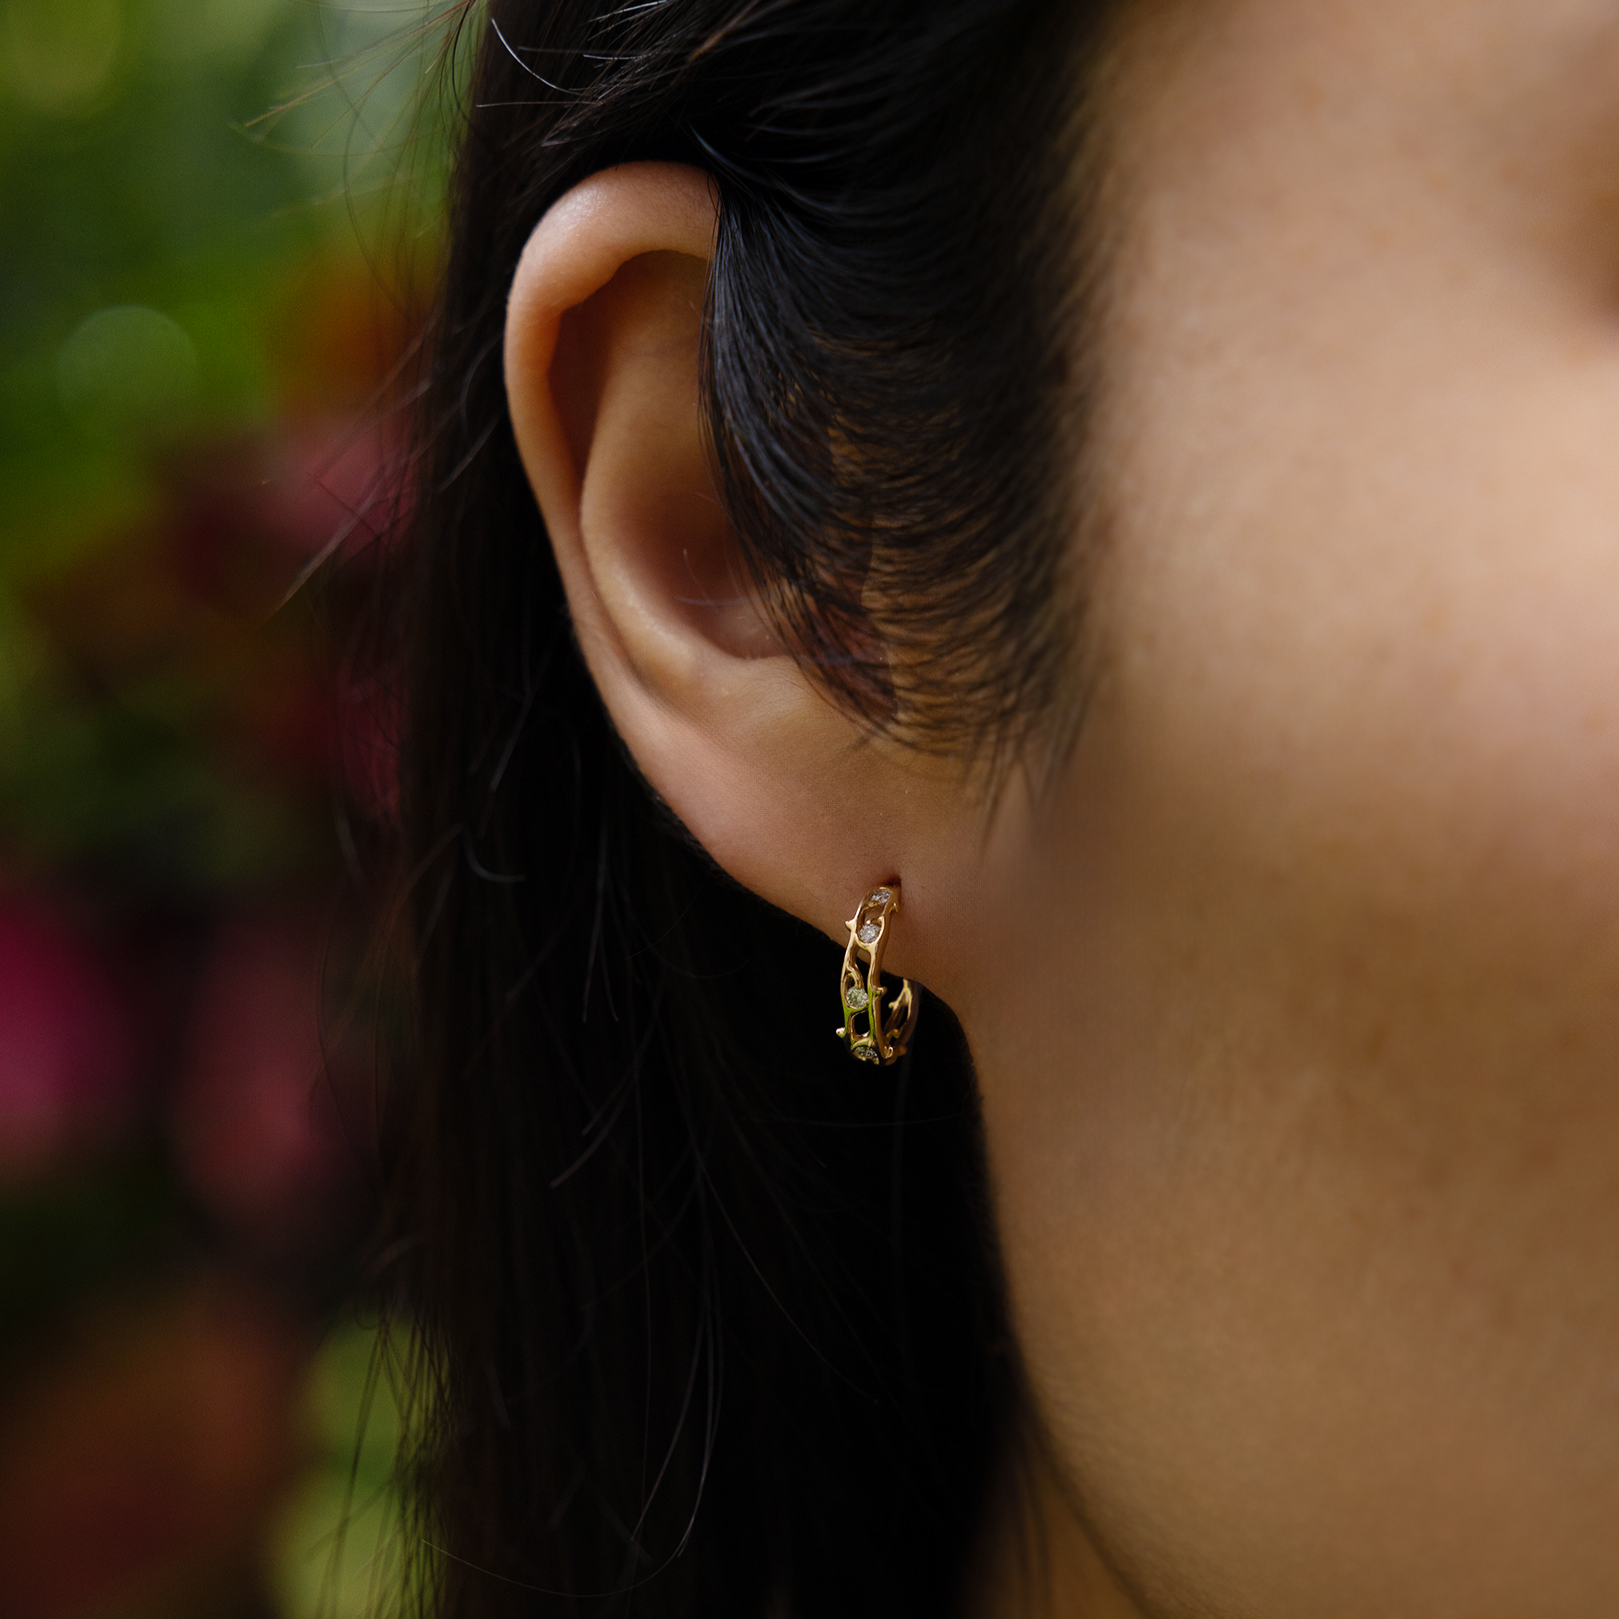 Heritage Earrings in Gold with Diamonds - 13mm